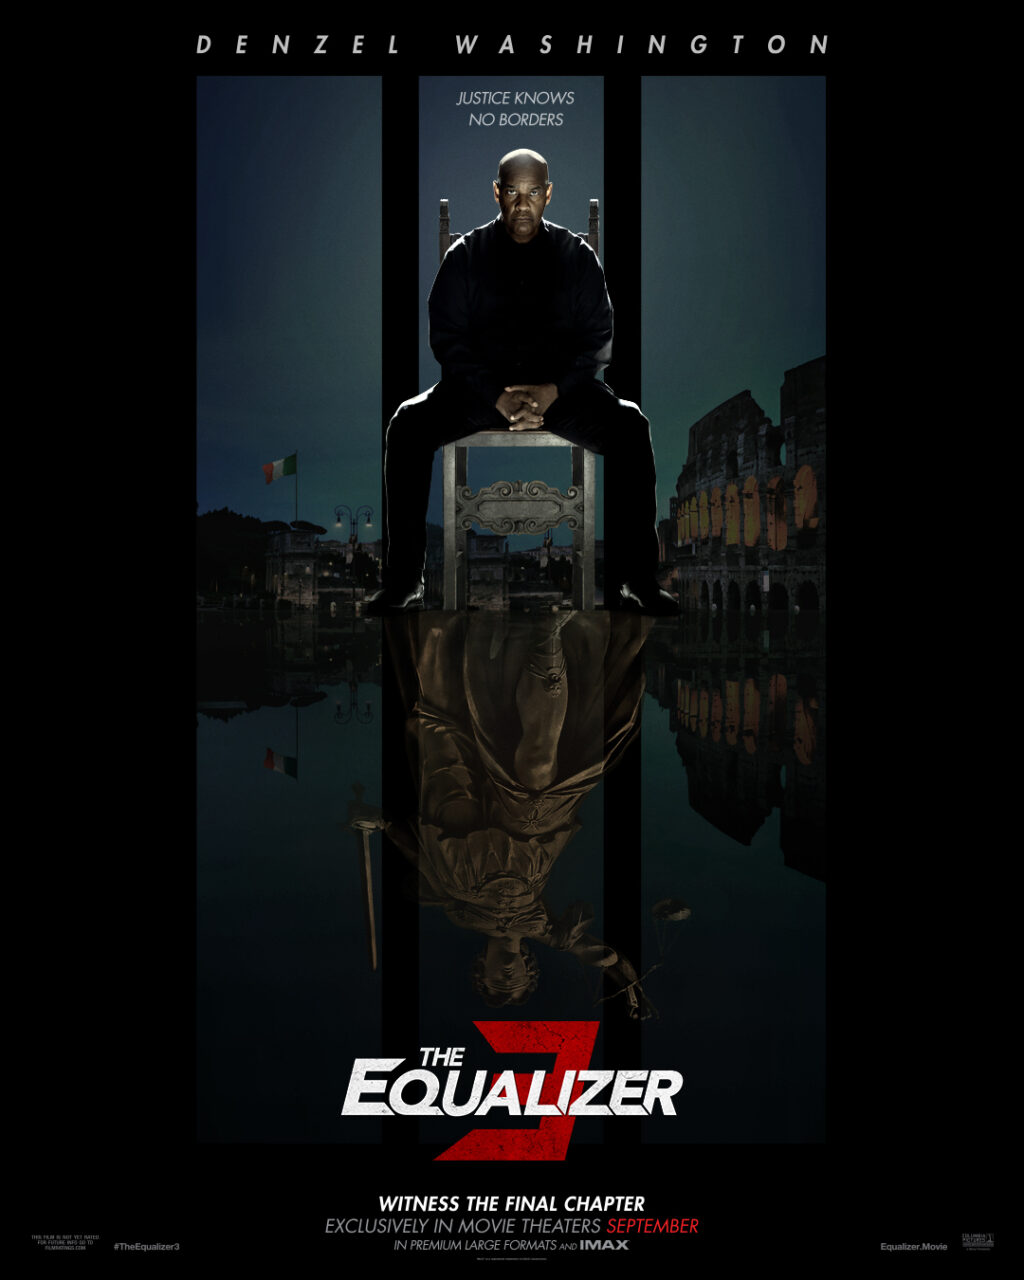 The Equalizer 3 poster (Sony Pictures)